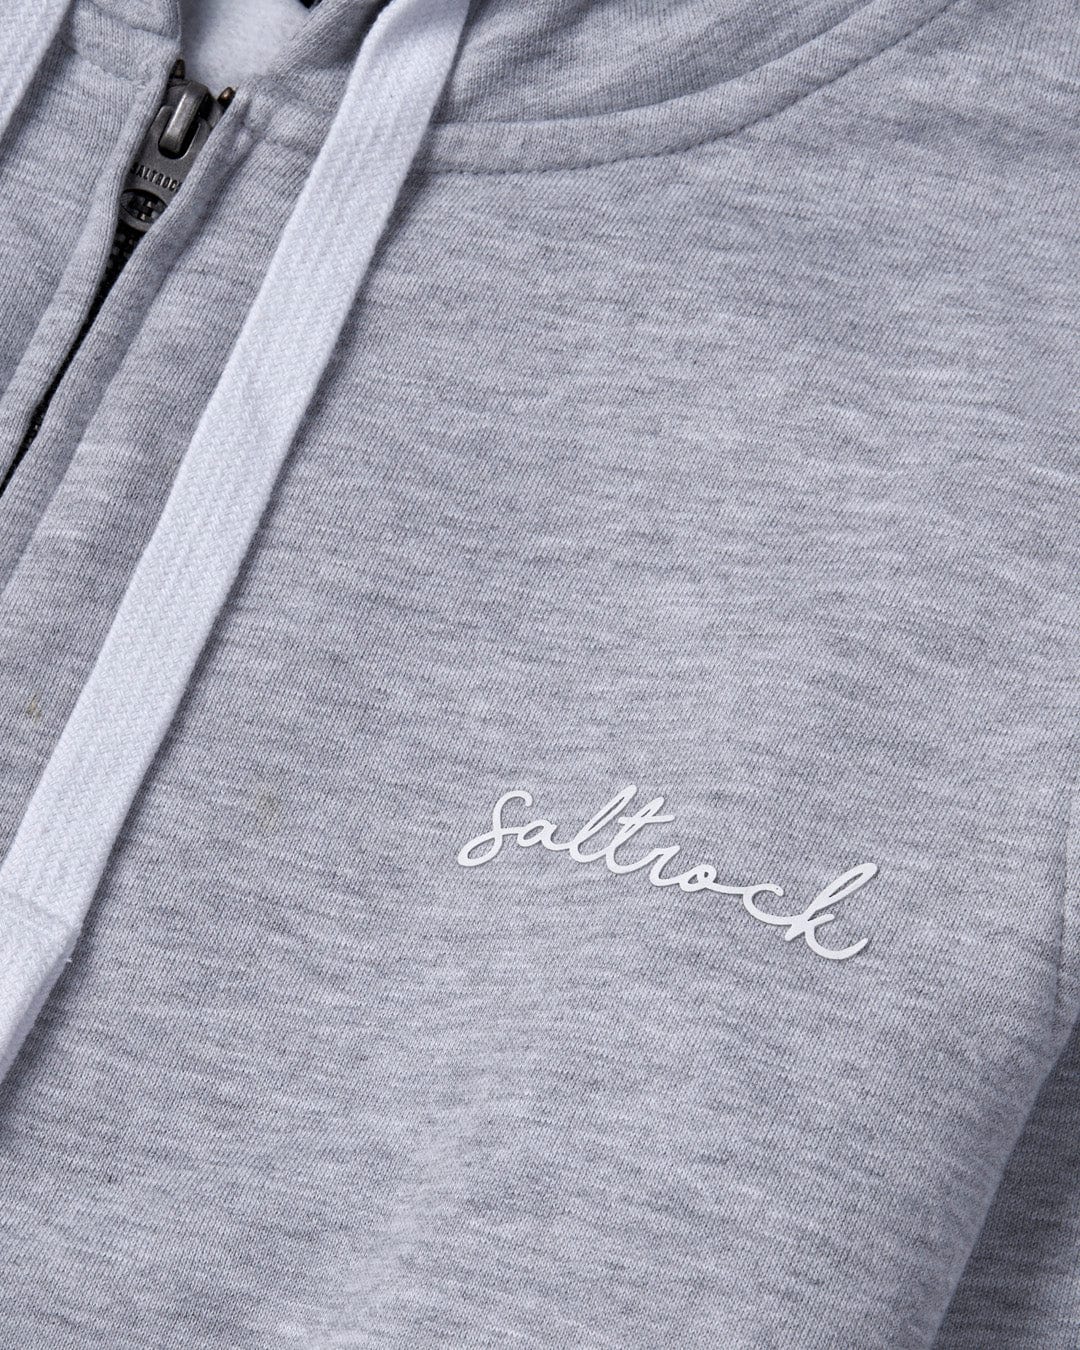 Close-up of a Saltrock Velator Women's Zip Hoodie in grey fabric with a zipper, embroidered "Saltrock" branding, and contrasting draw cords.